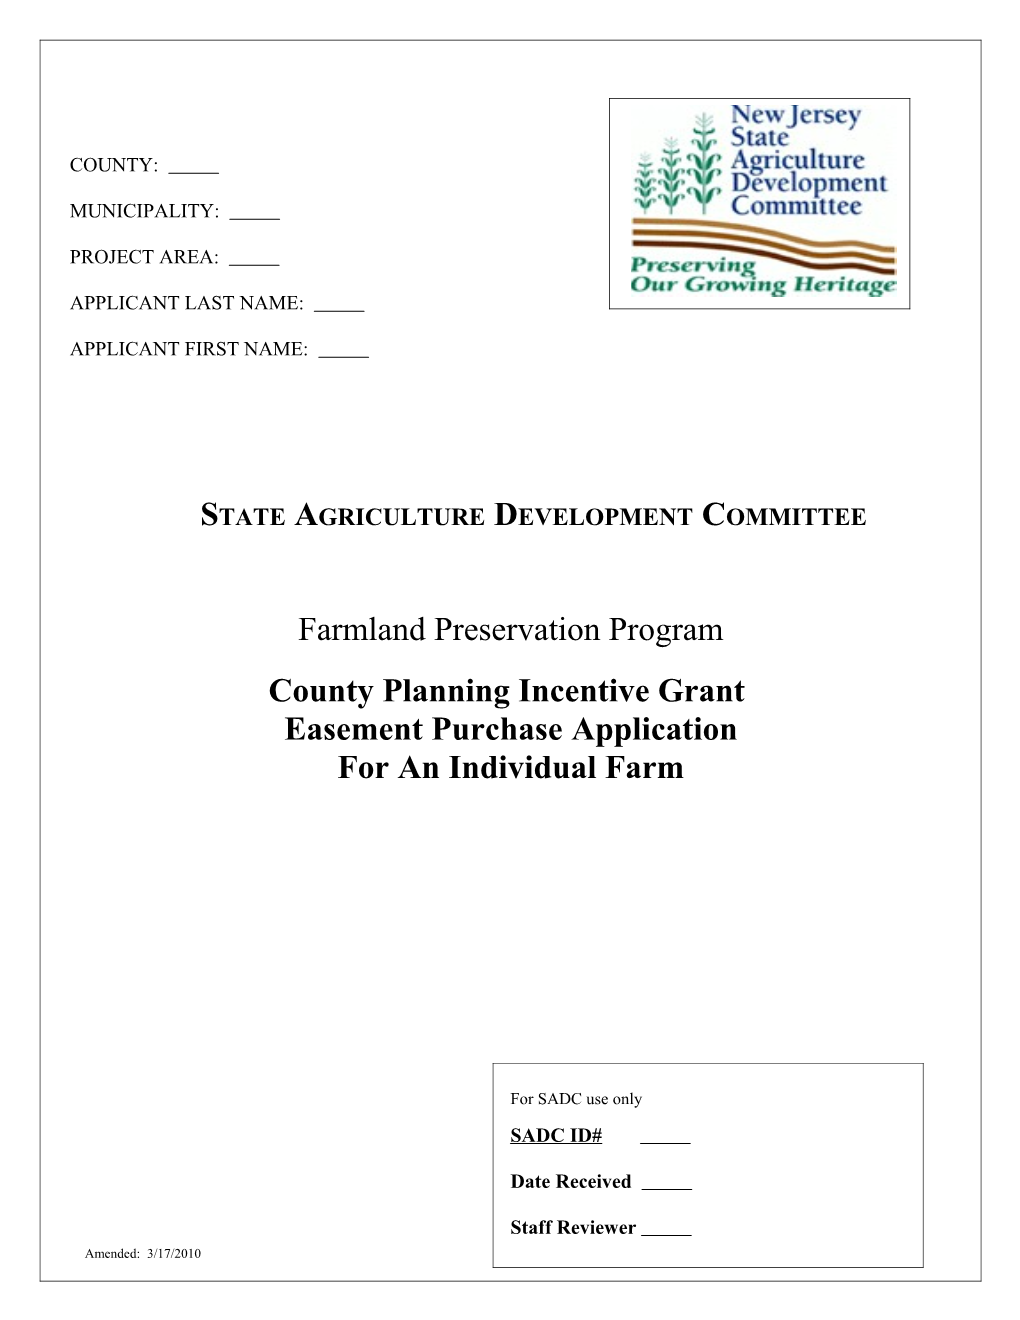 State Agriculture Development Committee